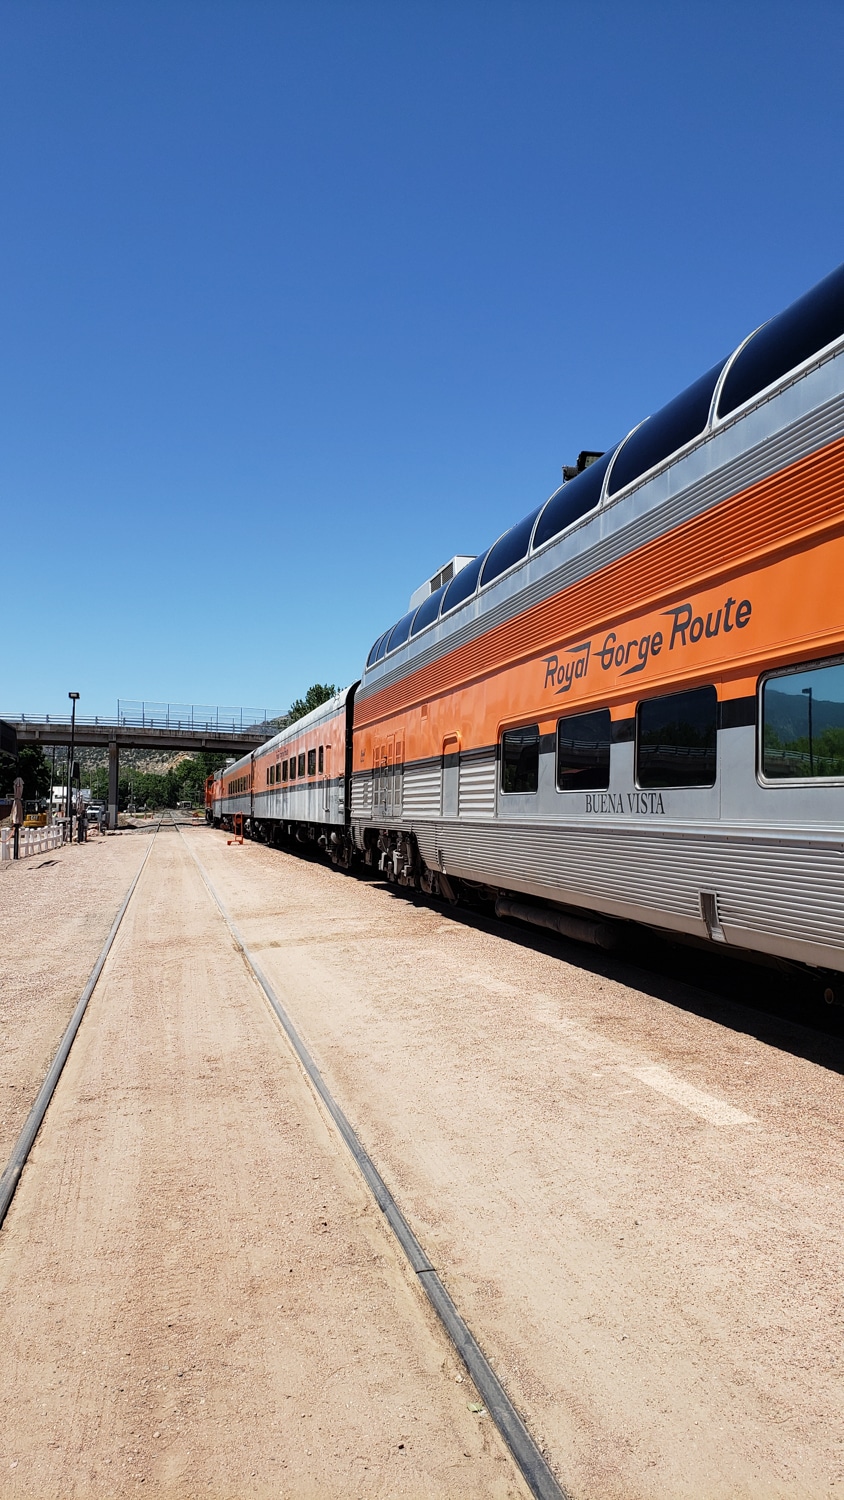 royal gorge railroad day trip from denver